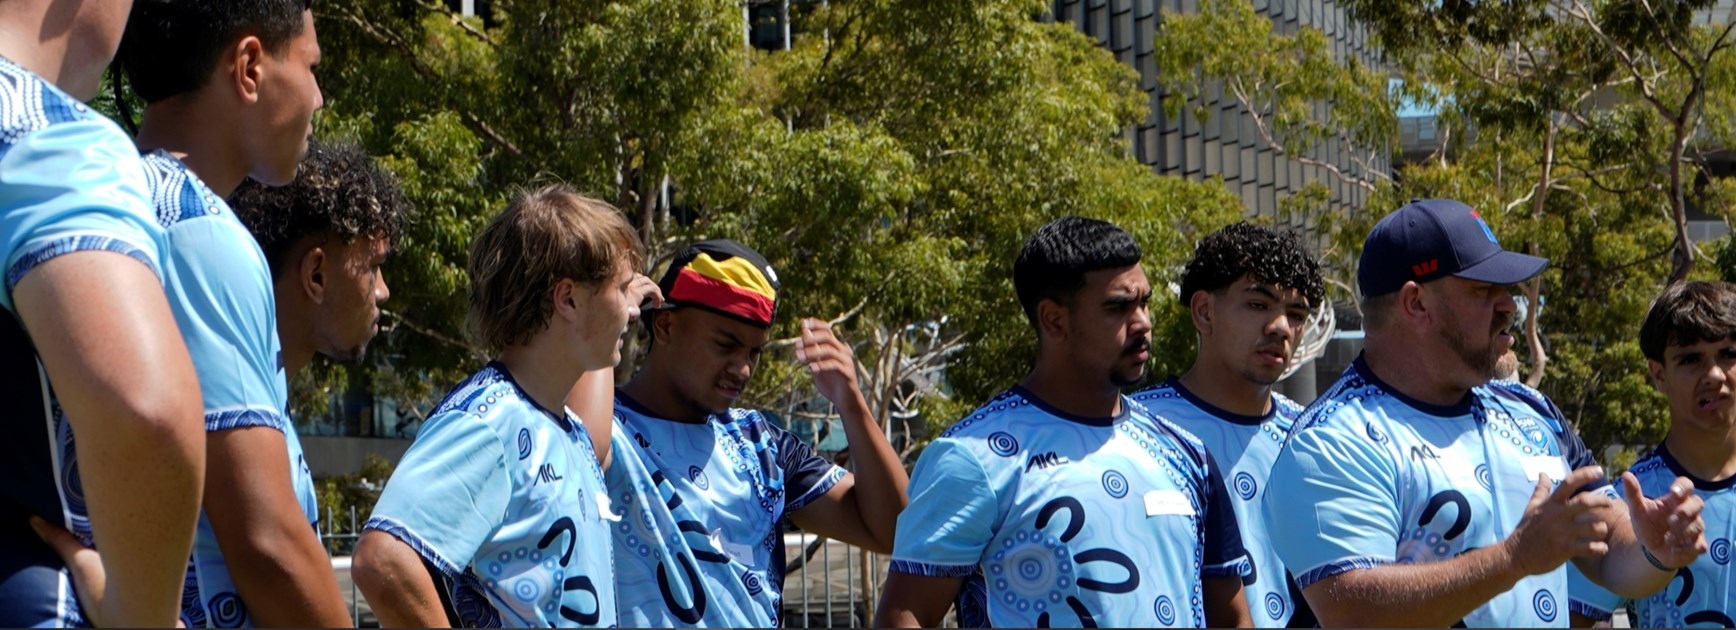 An Immortal's connection with the NSW Koori U17s side